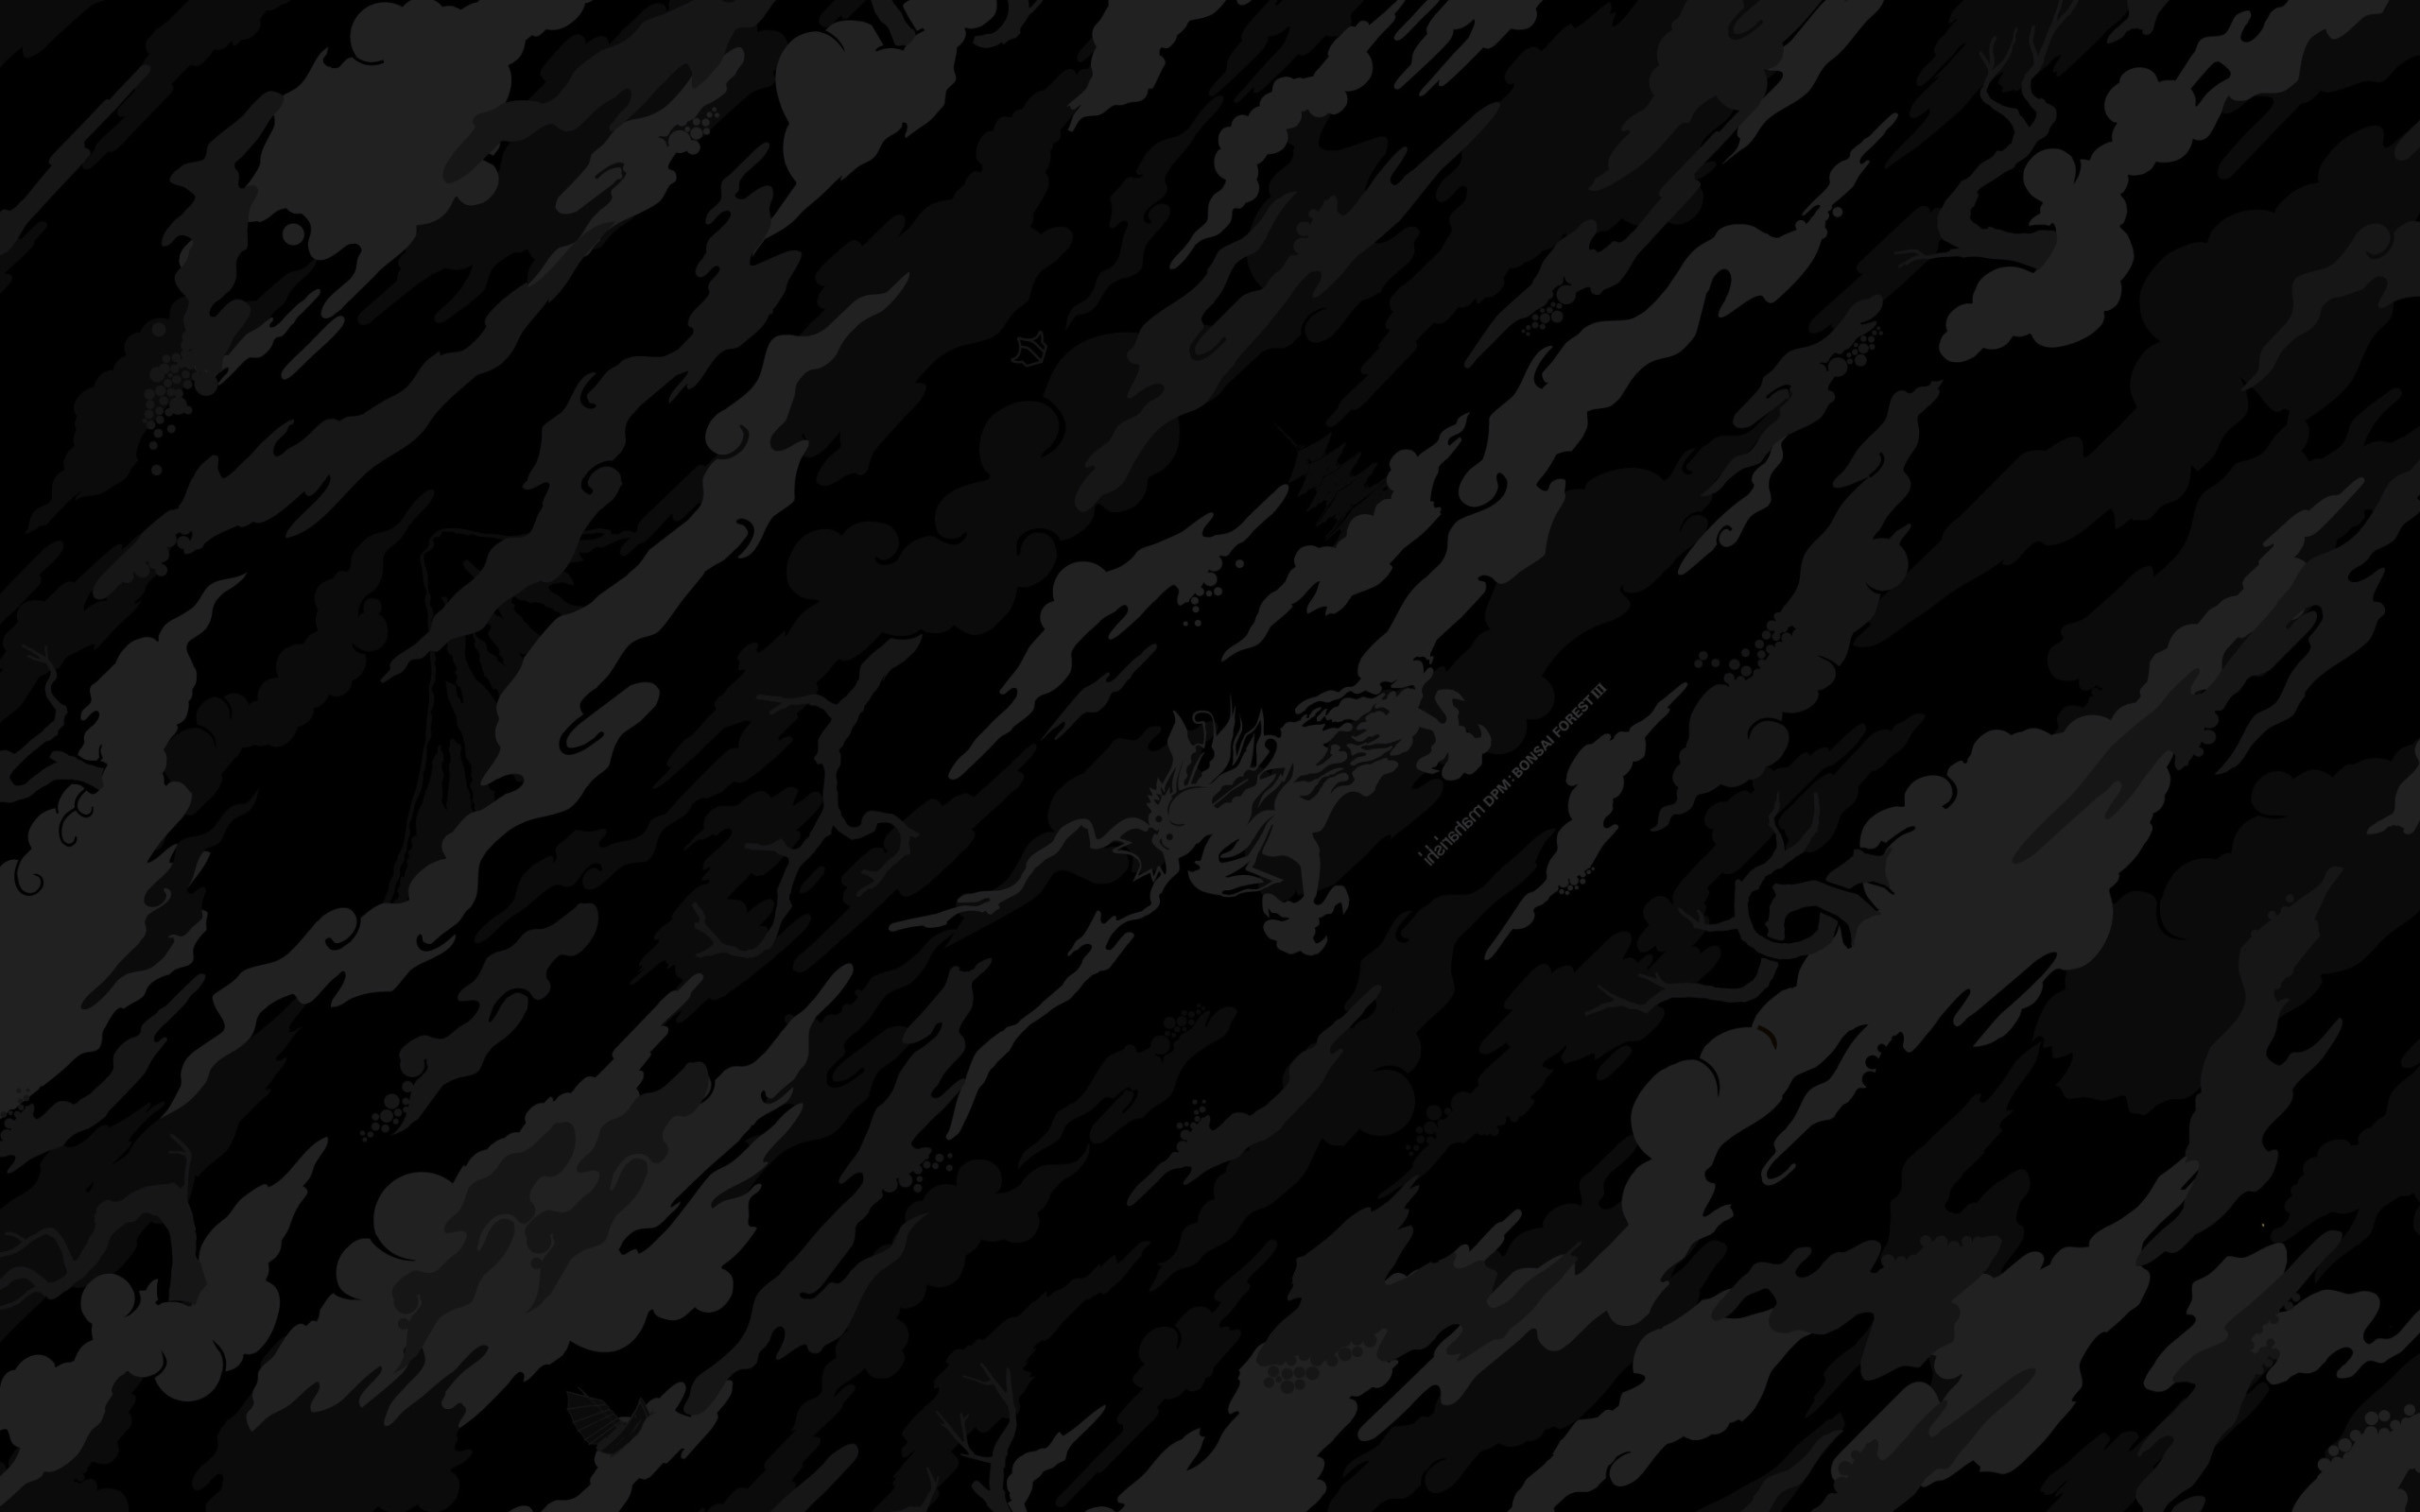 Camouflage, Iphone Wallpapers, Artwork, Night